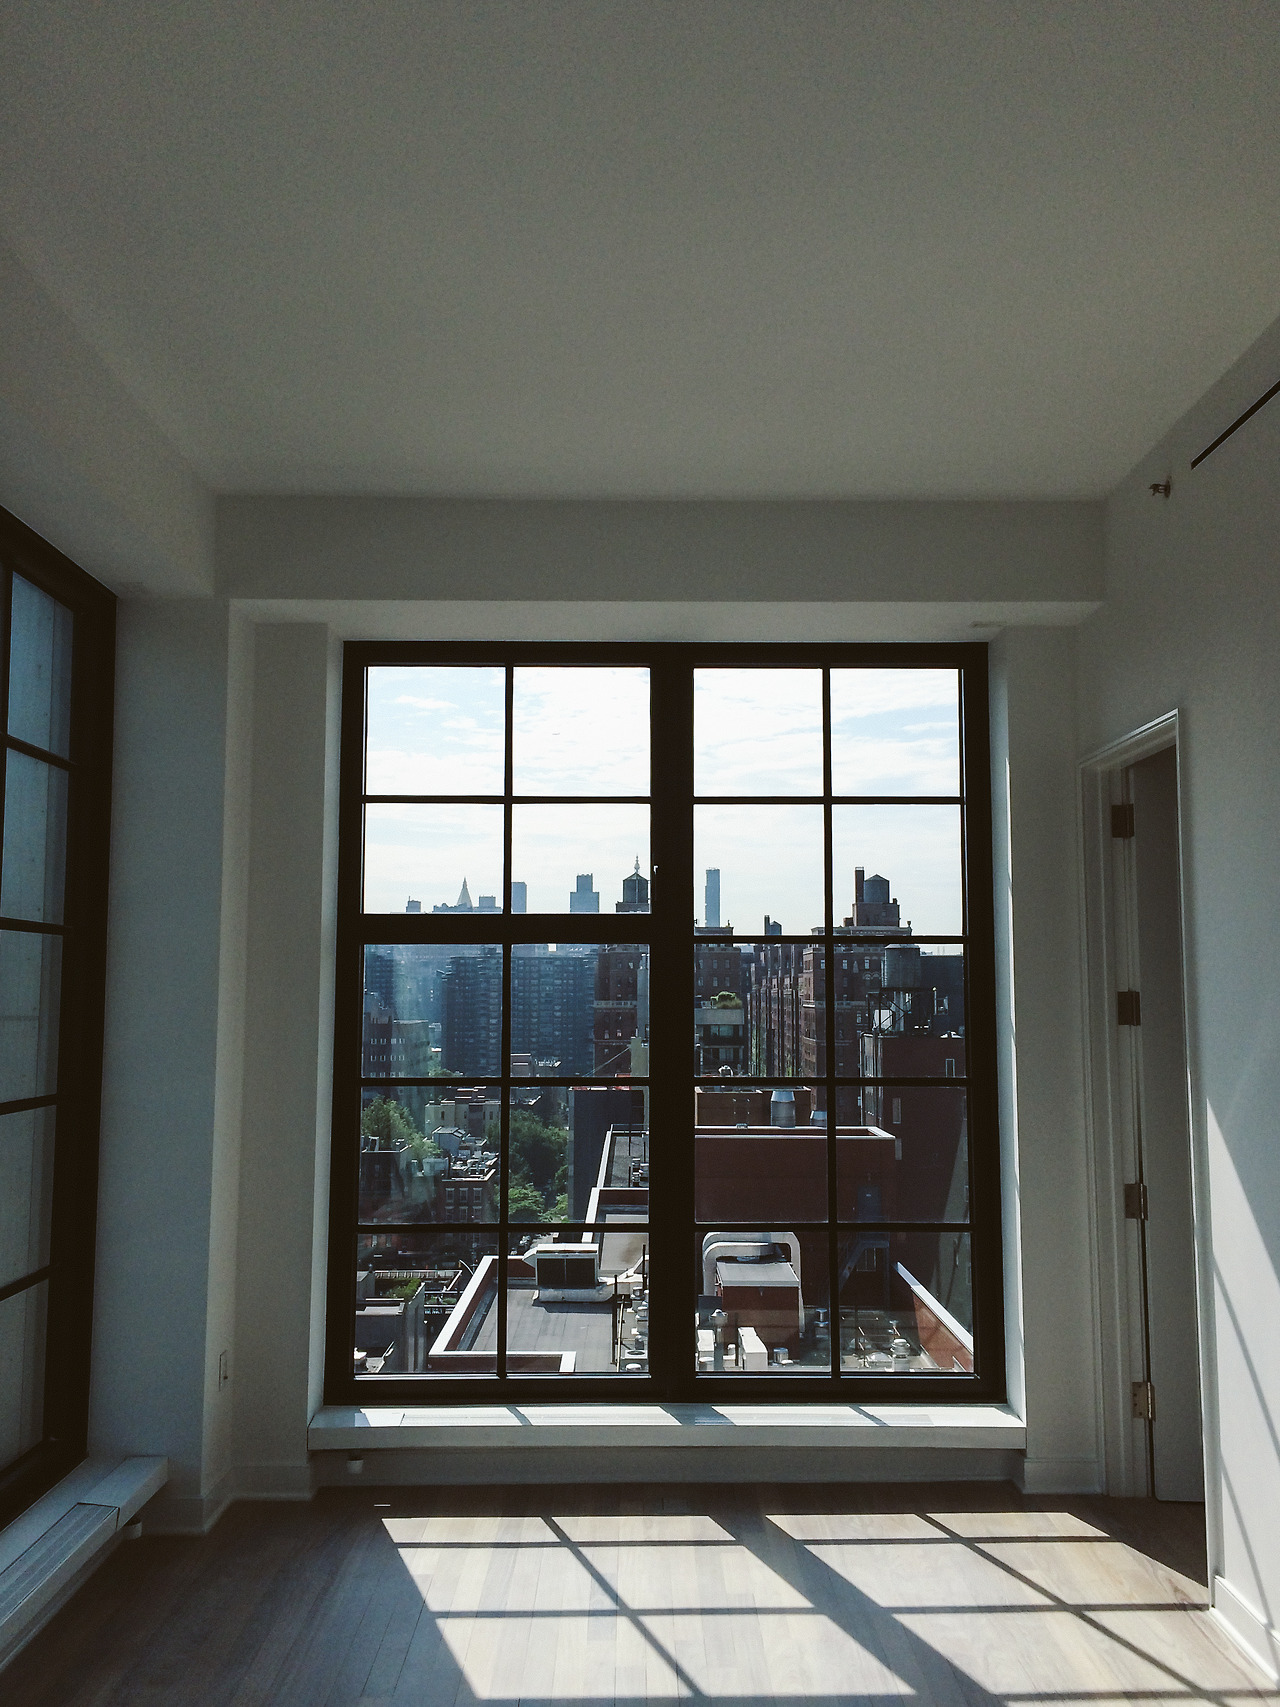 Apartment with big window with a view ITCHBAN.com